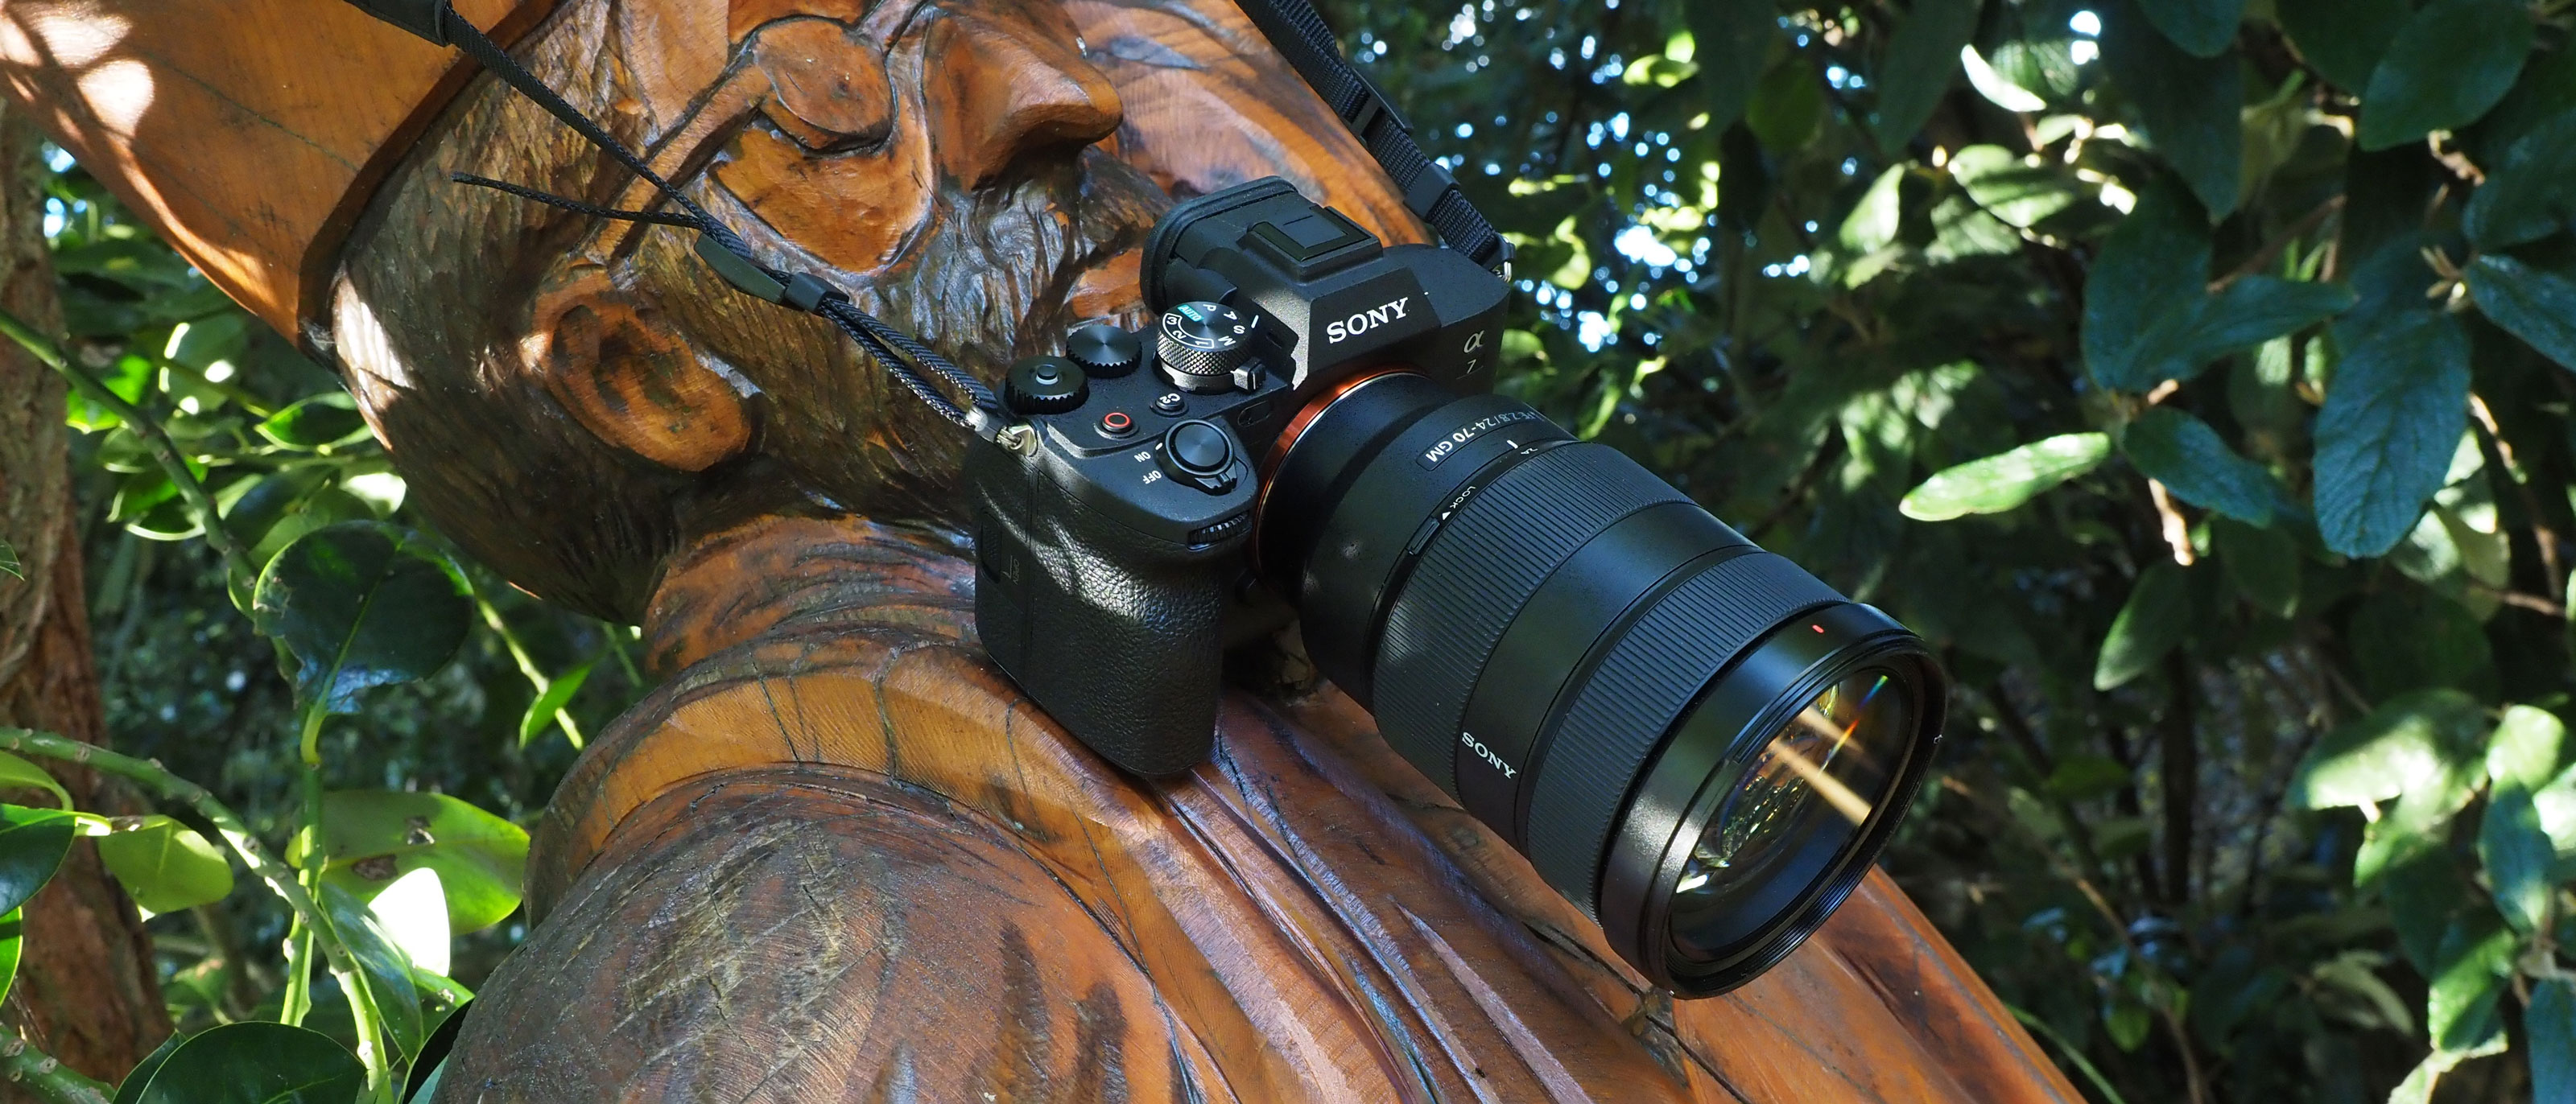 Sony A7 IV review: a powerful mirrorless all-rounder that can do